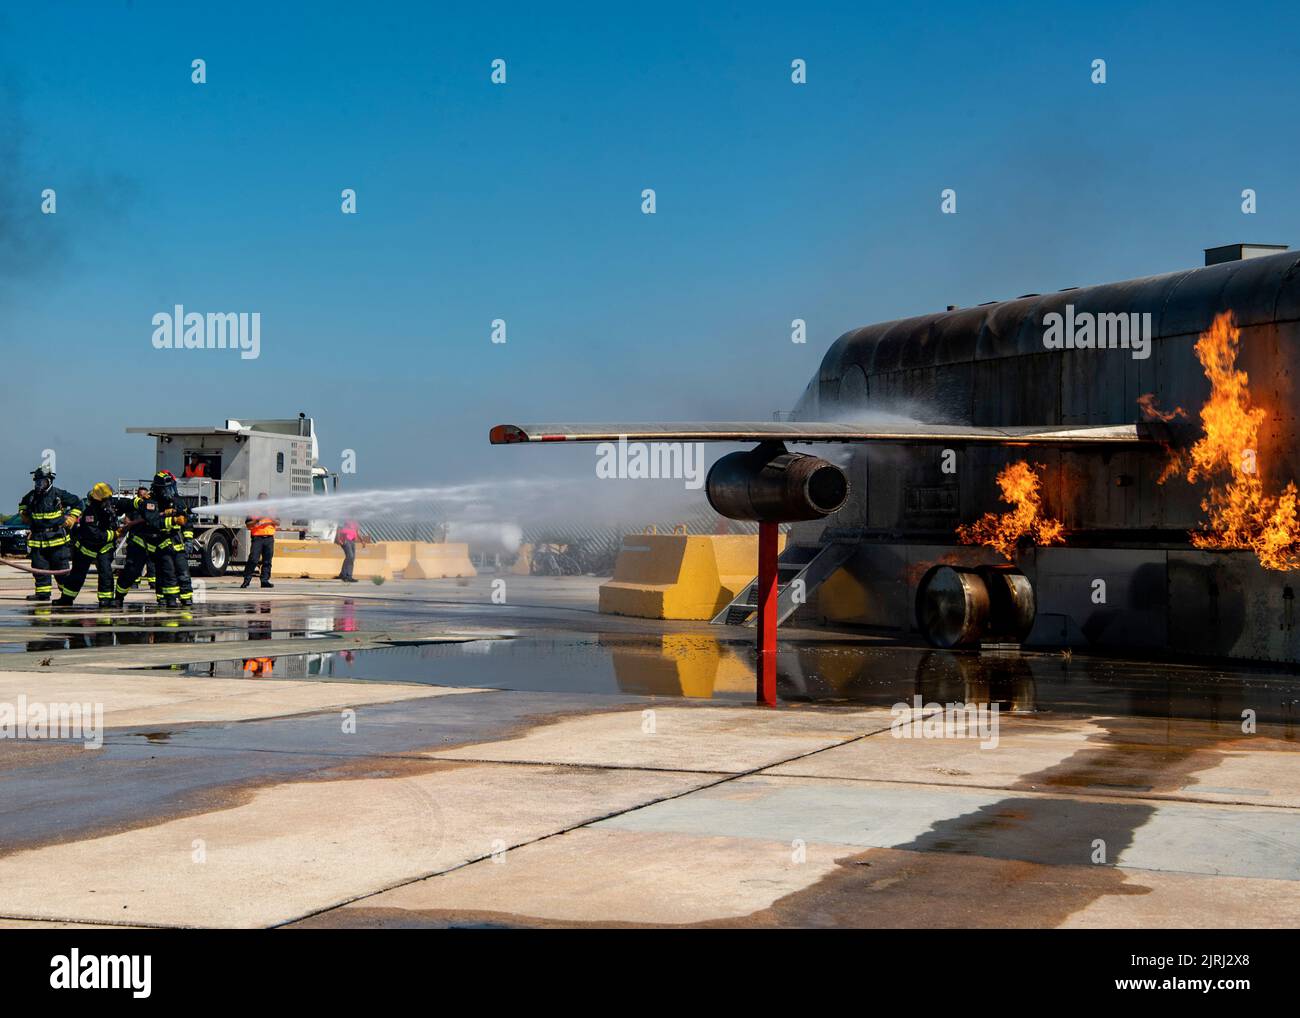 NAVAL STATION ROTA, Spain (Aug. 23, 2022) Naval Station (NAVSTA) Rota Fire and Emergency Services fight a fire from a simulated plane crash during a flight line emergency drill on NAVSTA Rota, Spain, Aug. 23, 2022. Naval Station Rota sustains the fleet, enables the fighter and supports the family by conducting air operations, port operations, ensuring security and safety, assuring quality of life and providing the core services of power, water, fuel and information technology. (U.S. Navy photo by Mass Communication Specialist 2nd Class Jacob Owen.) Stock Photo